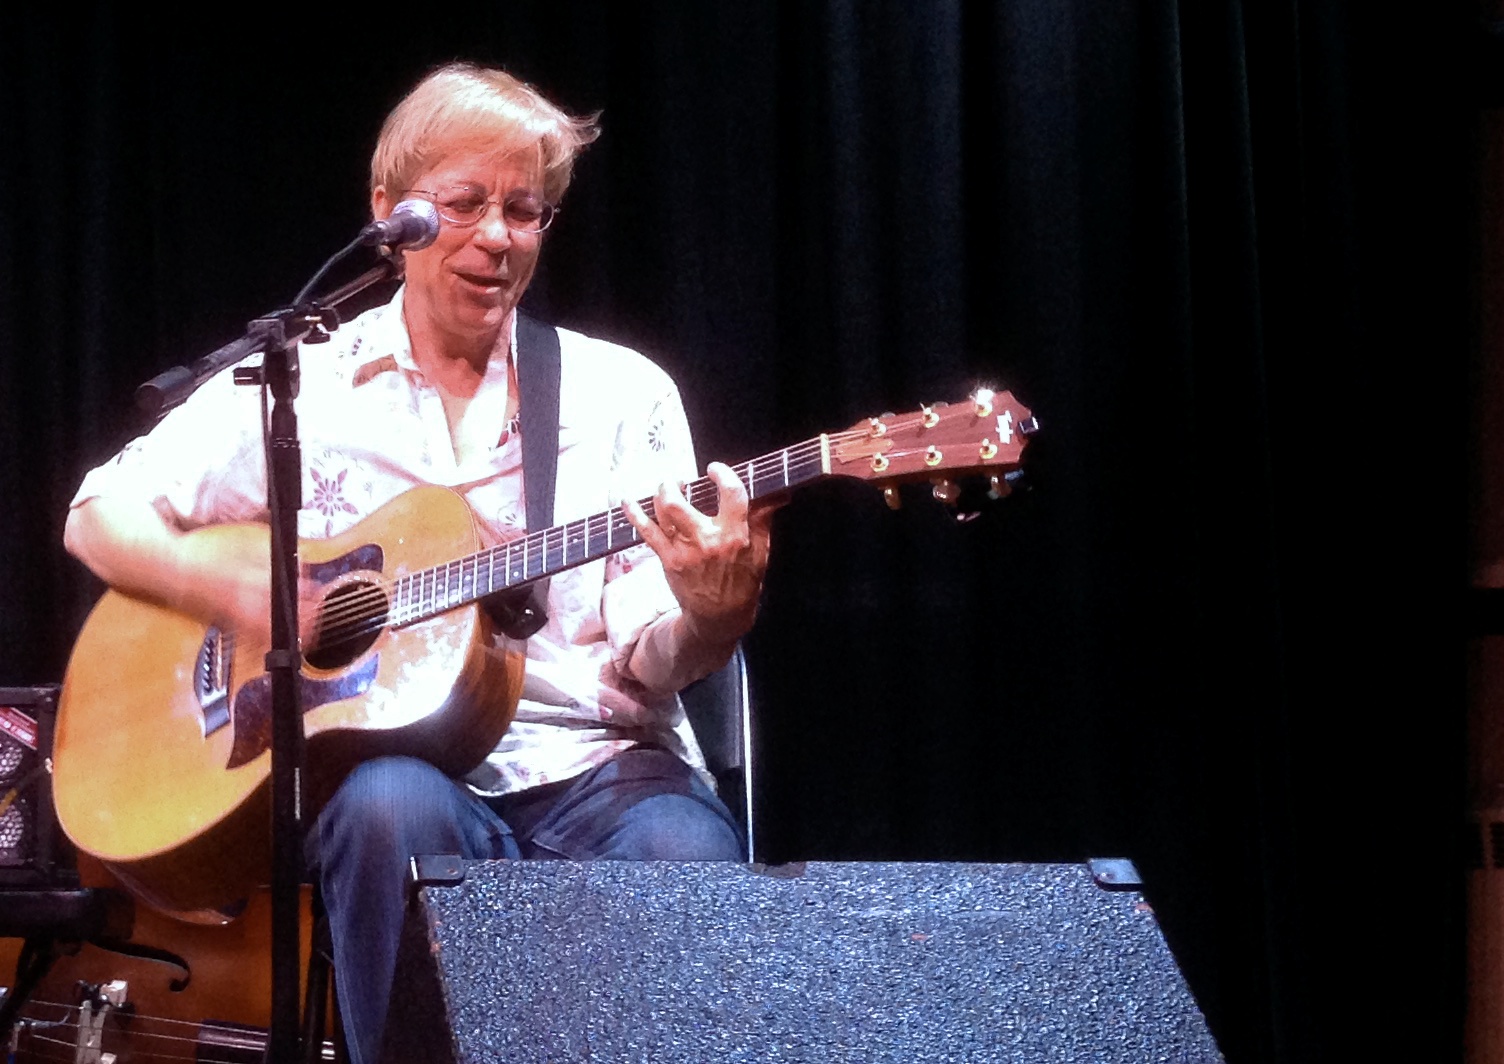 a man with glasses playing the guitar in front of a microphone